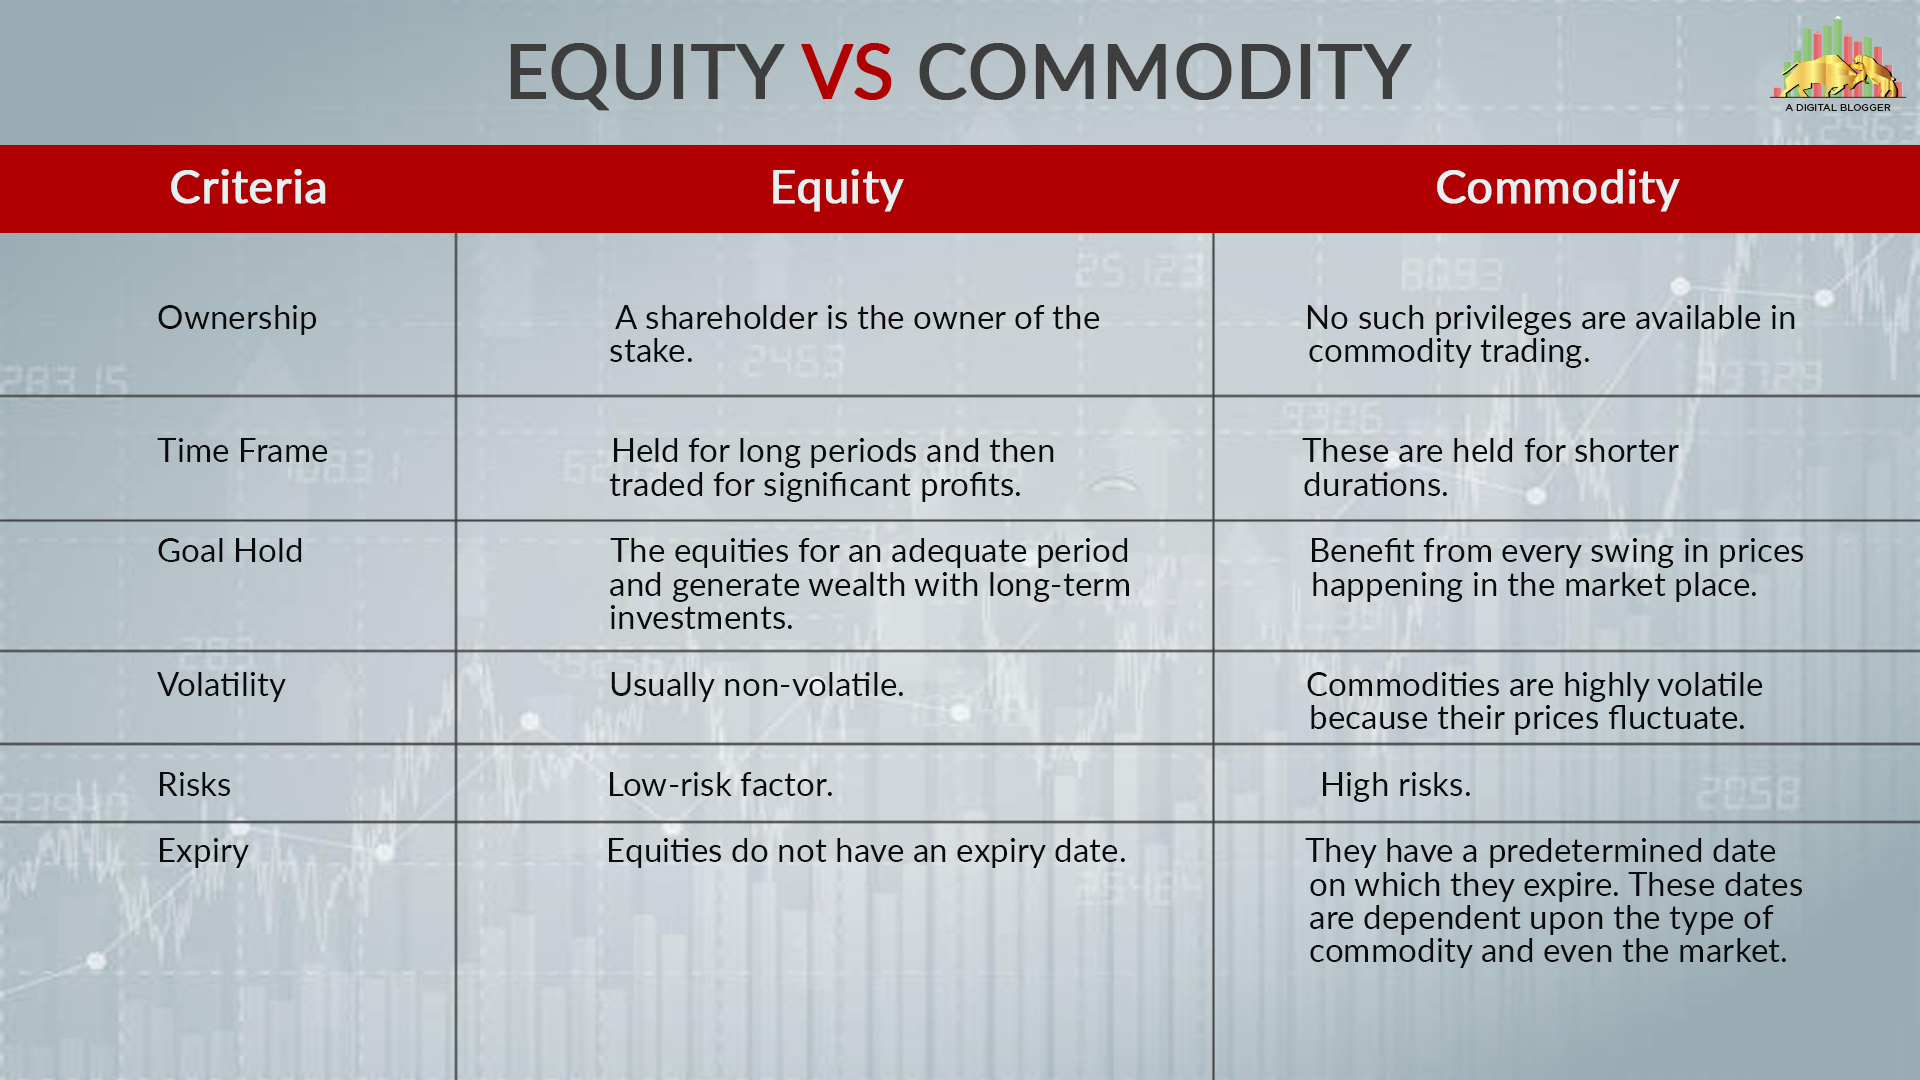 Equity vs Commodity Infographic